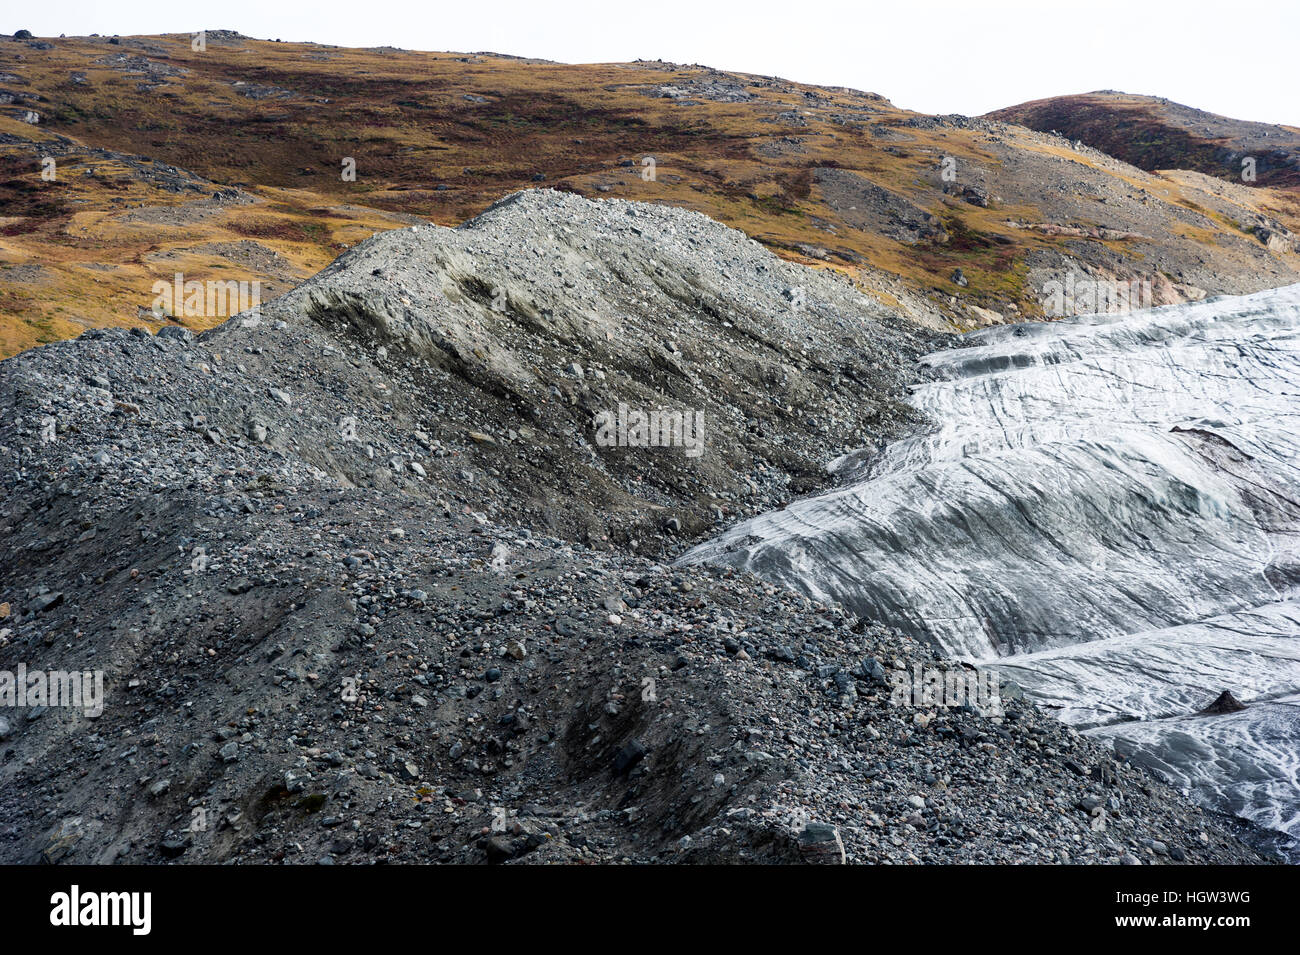 A pile of rock, sediment and silt debris deposited by the leading edge of a glacier. Stock Photo